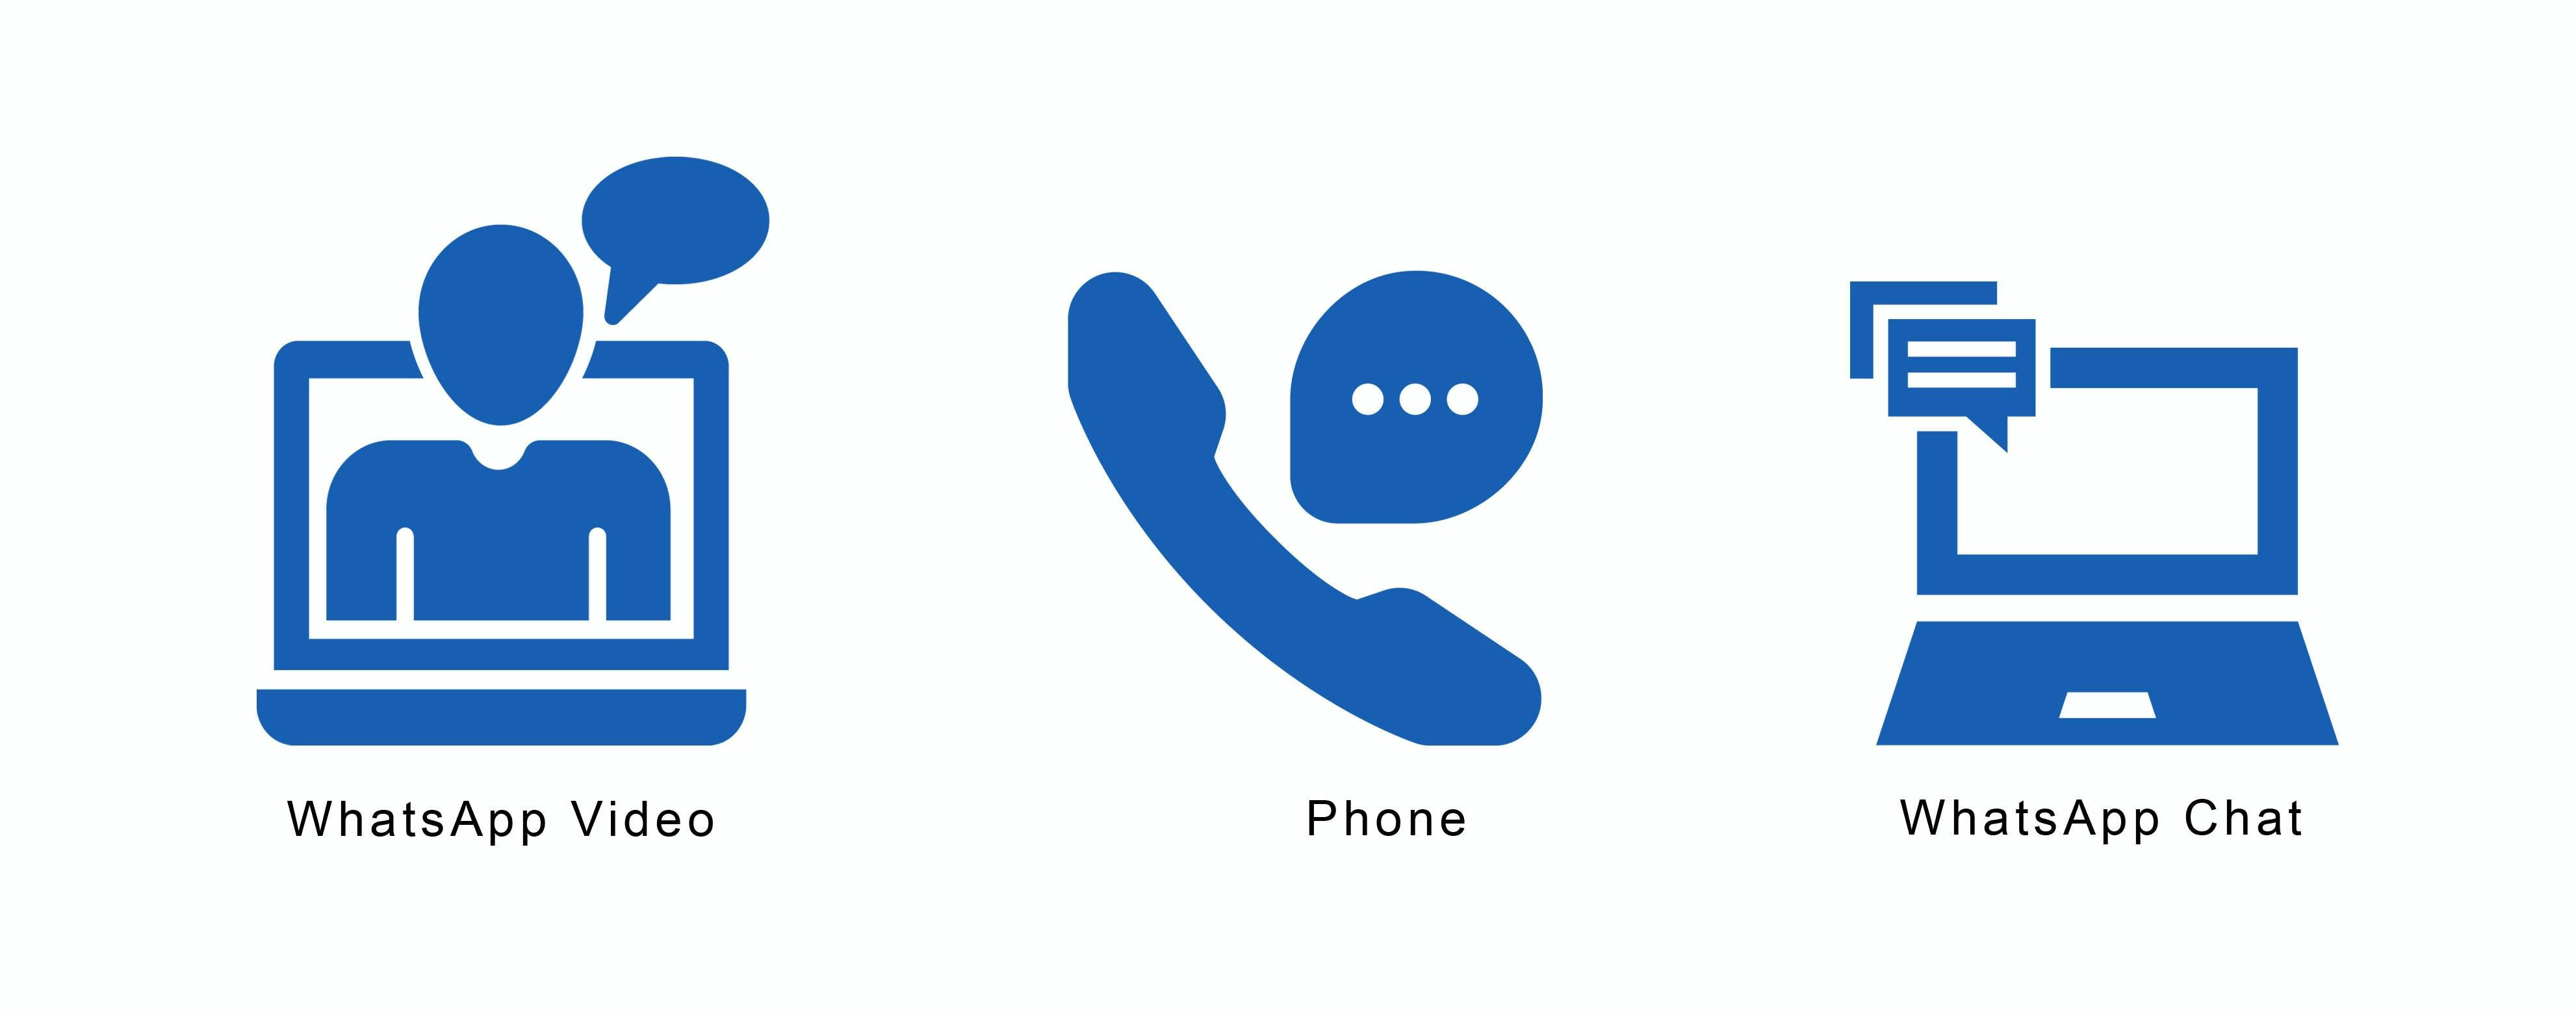 Icons for contact us by WhatsApp video or audio, phone call or chat-Need reliable advice from pharmacist?